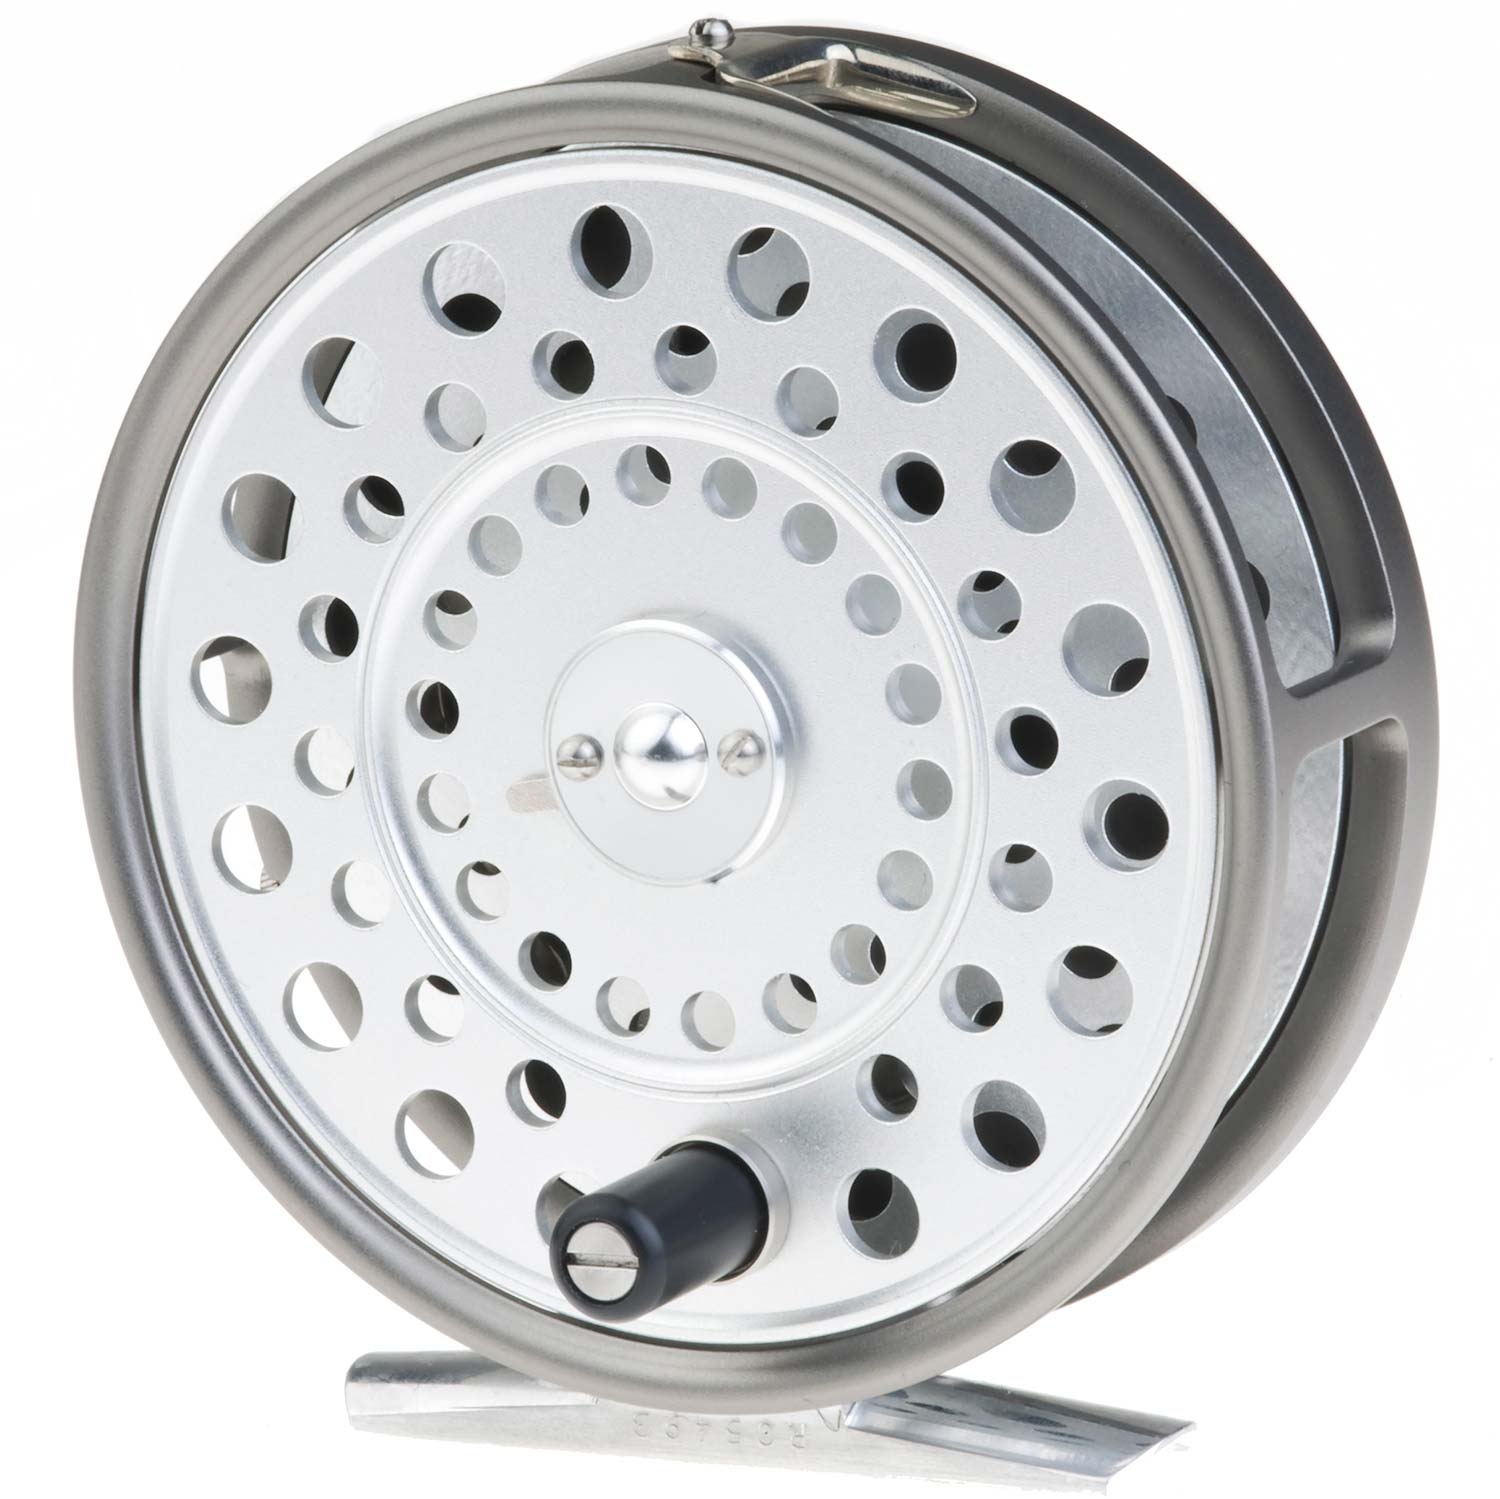 Hardy Lightweight Fly Reel - Low Weight Fly Fishing Reels at Angling Active